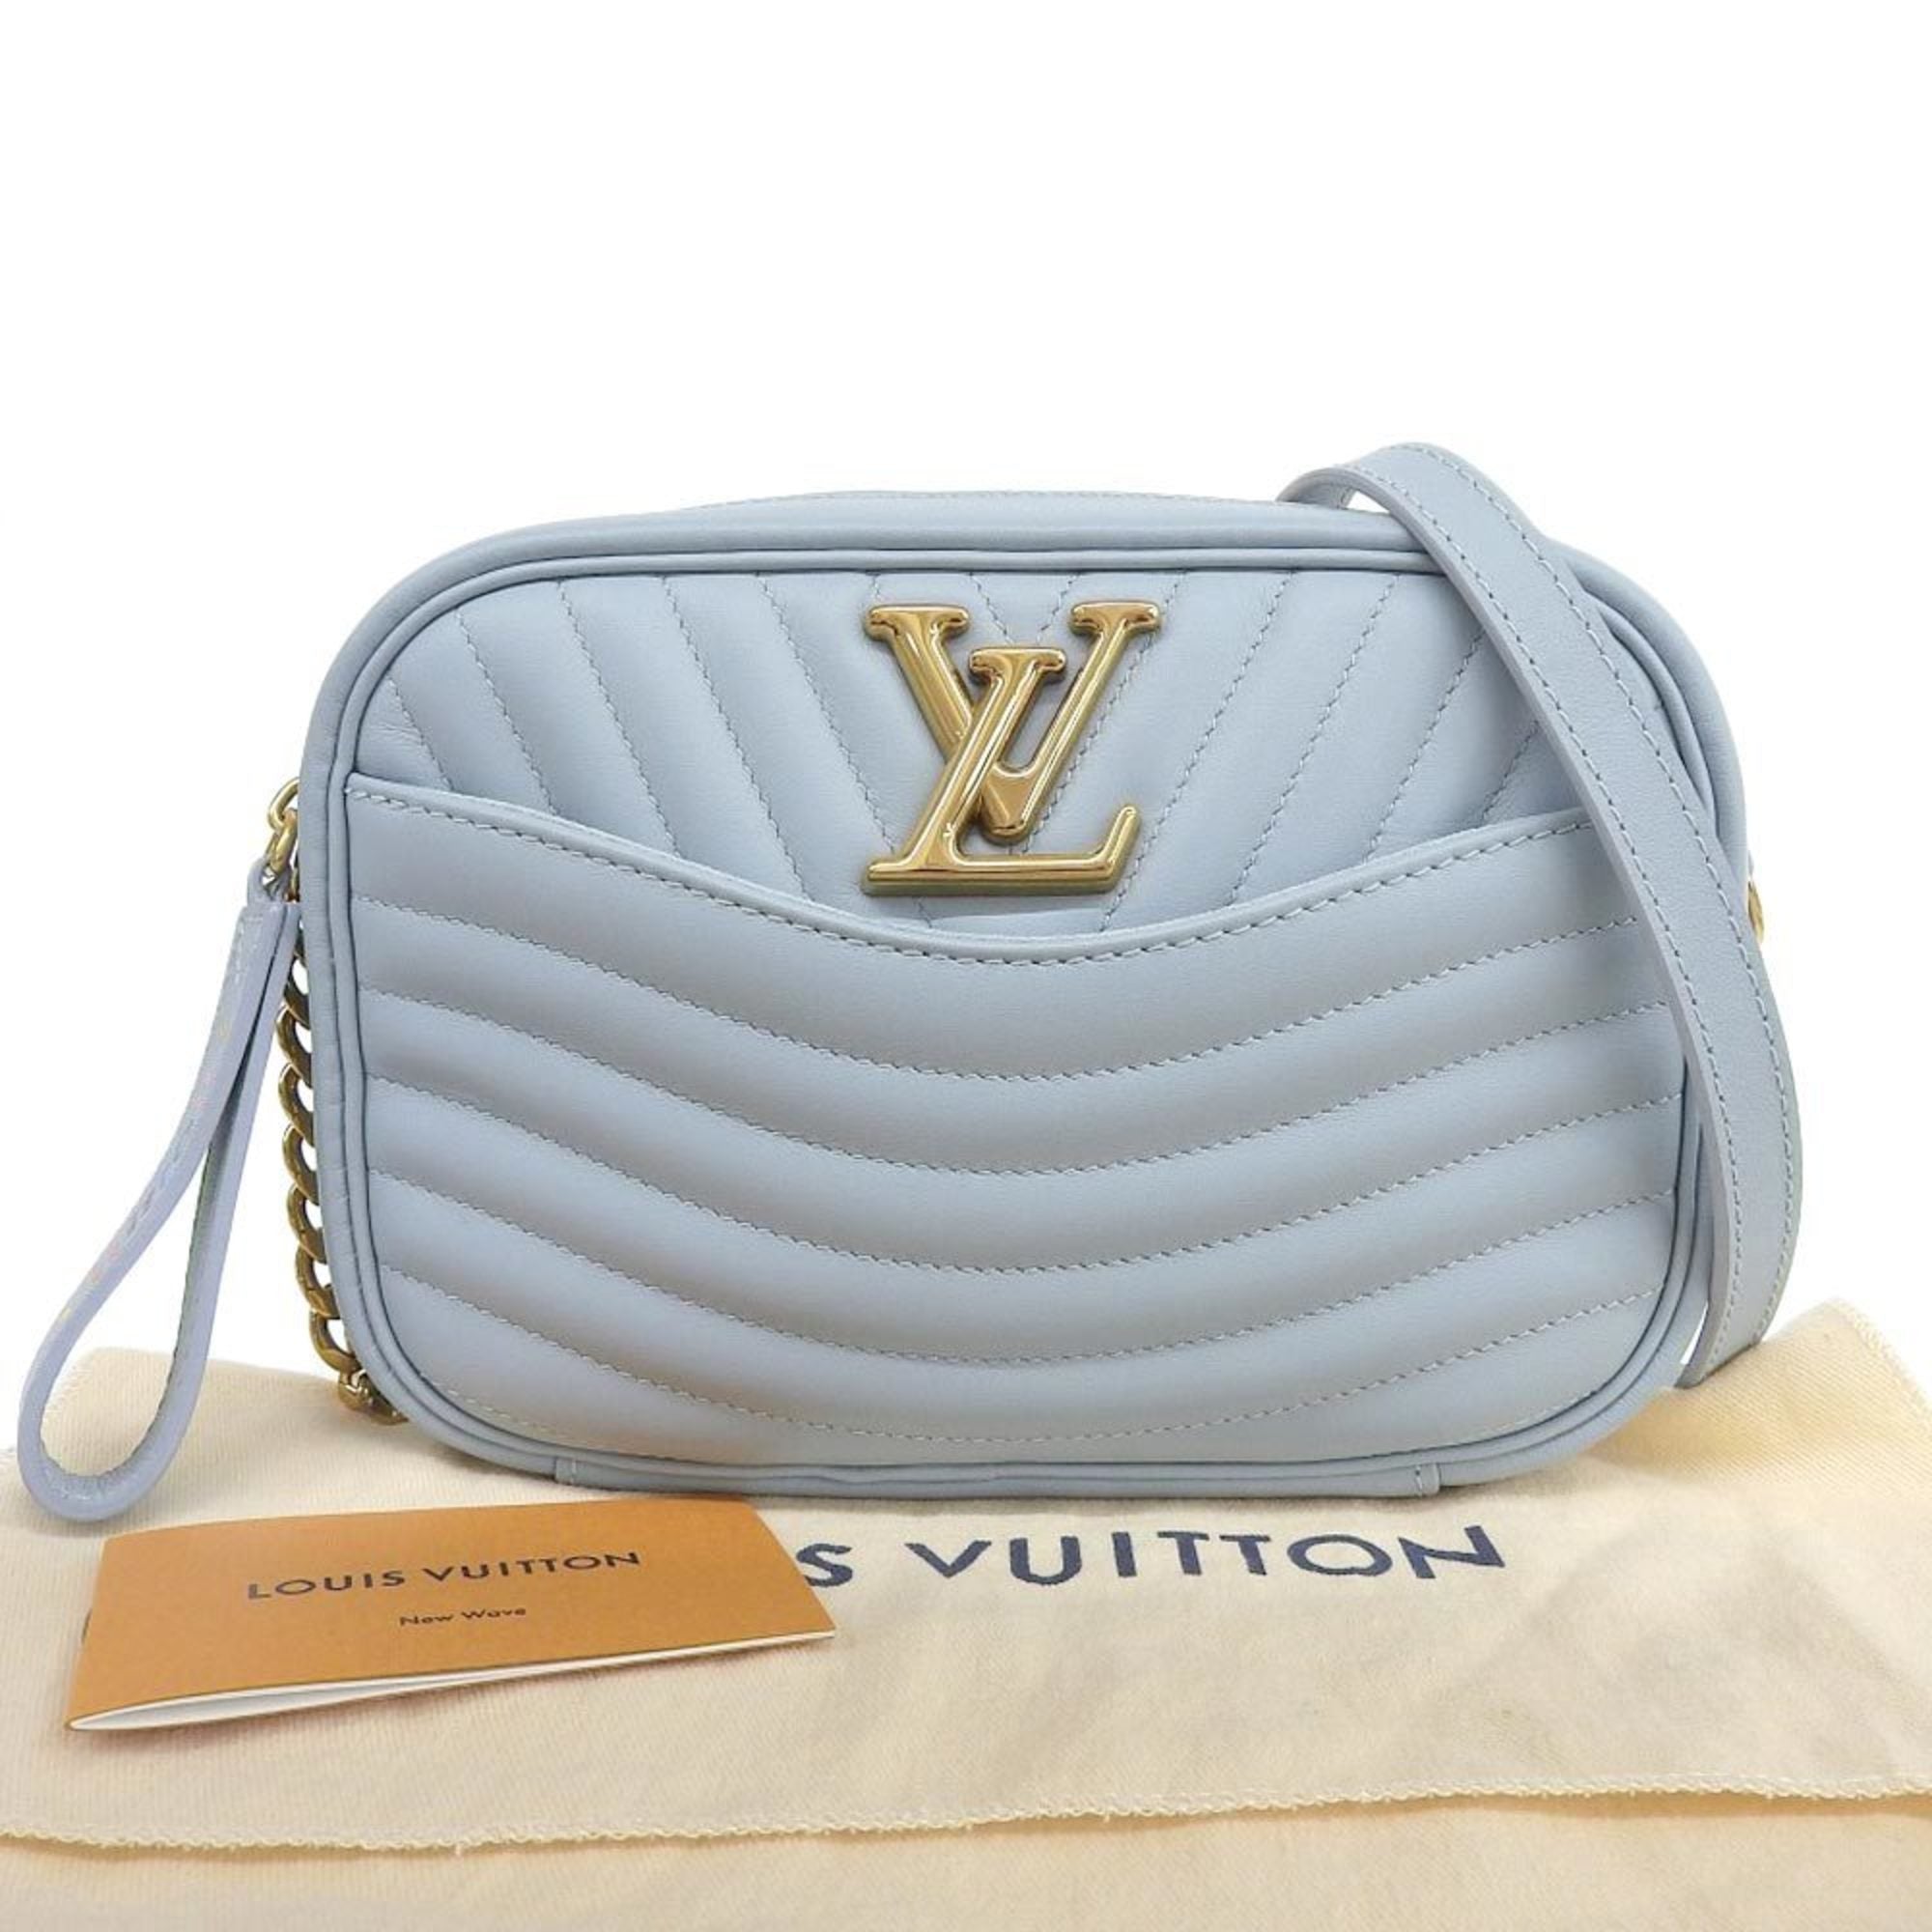 LOUIS VUITTON New Wave Quilted Leather Camera Bag Black